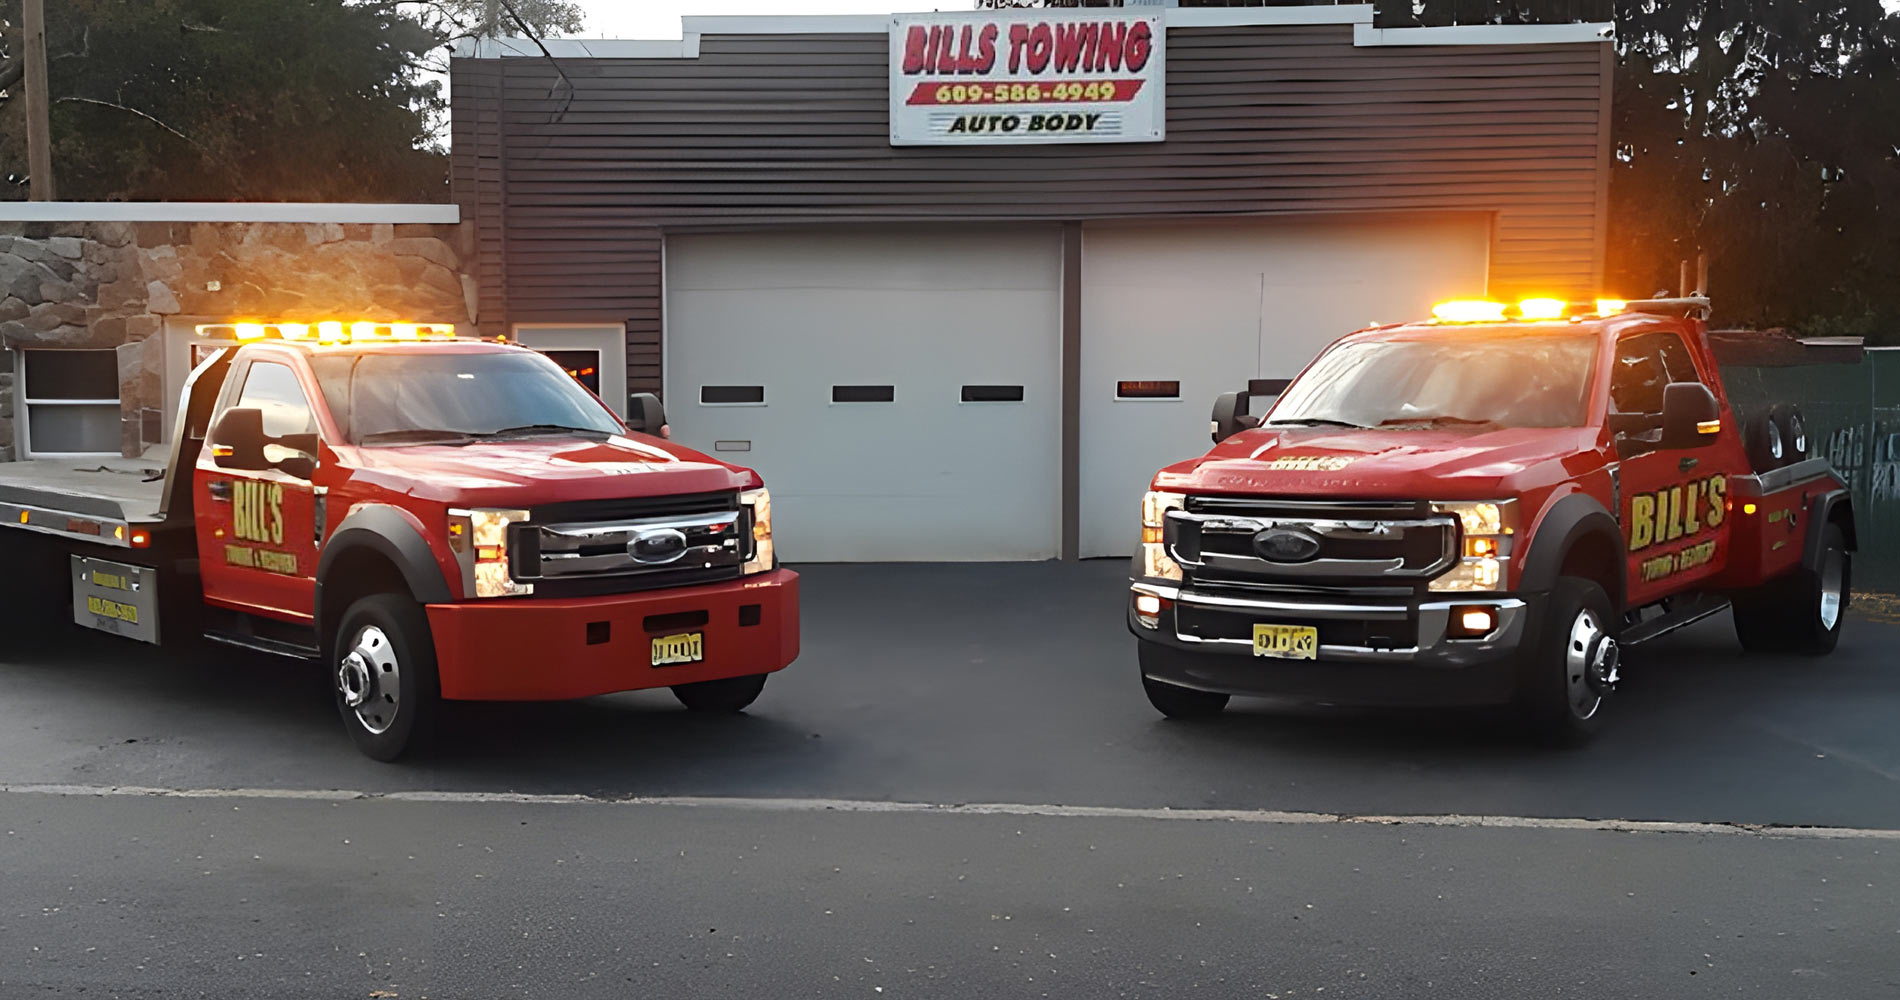 Bill's Towing | Lawrence Township, NJ 08648